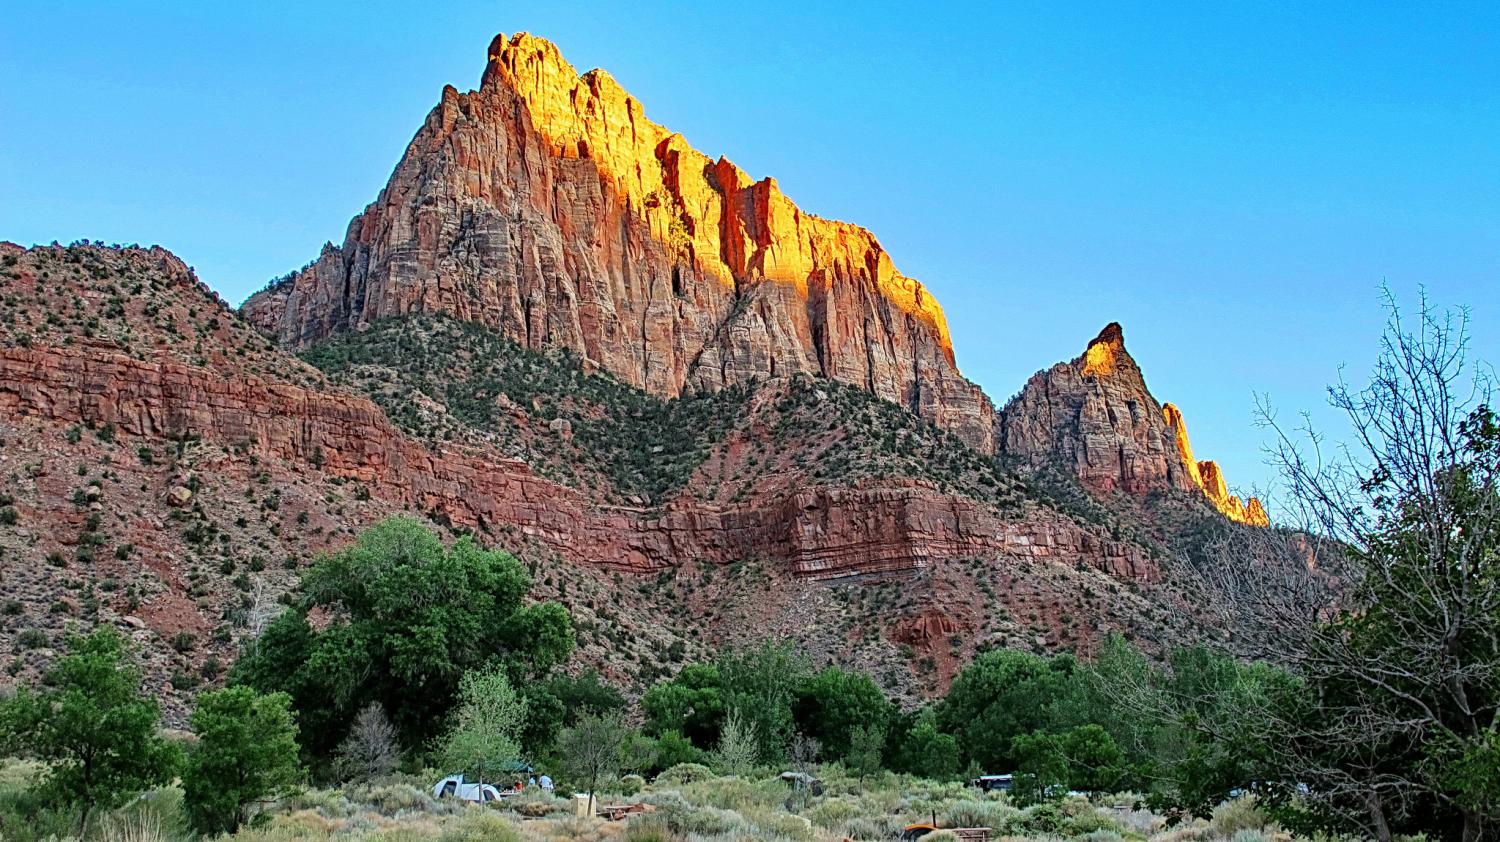 Zion-National-Park-is-open-thanks-in-part-to-local-officials-in-Utah.jpg